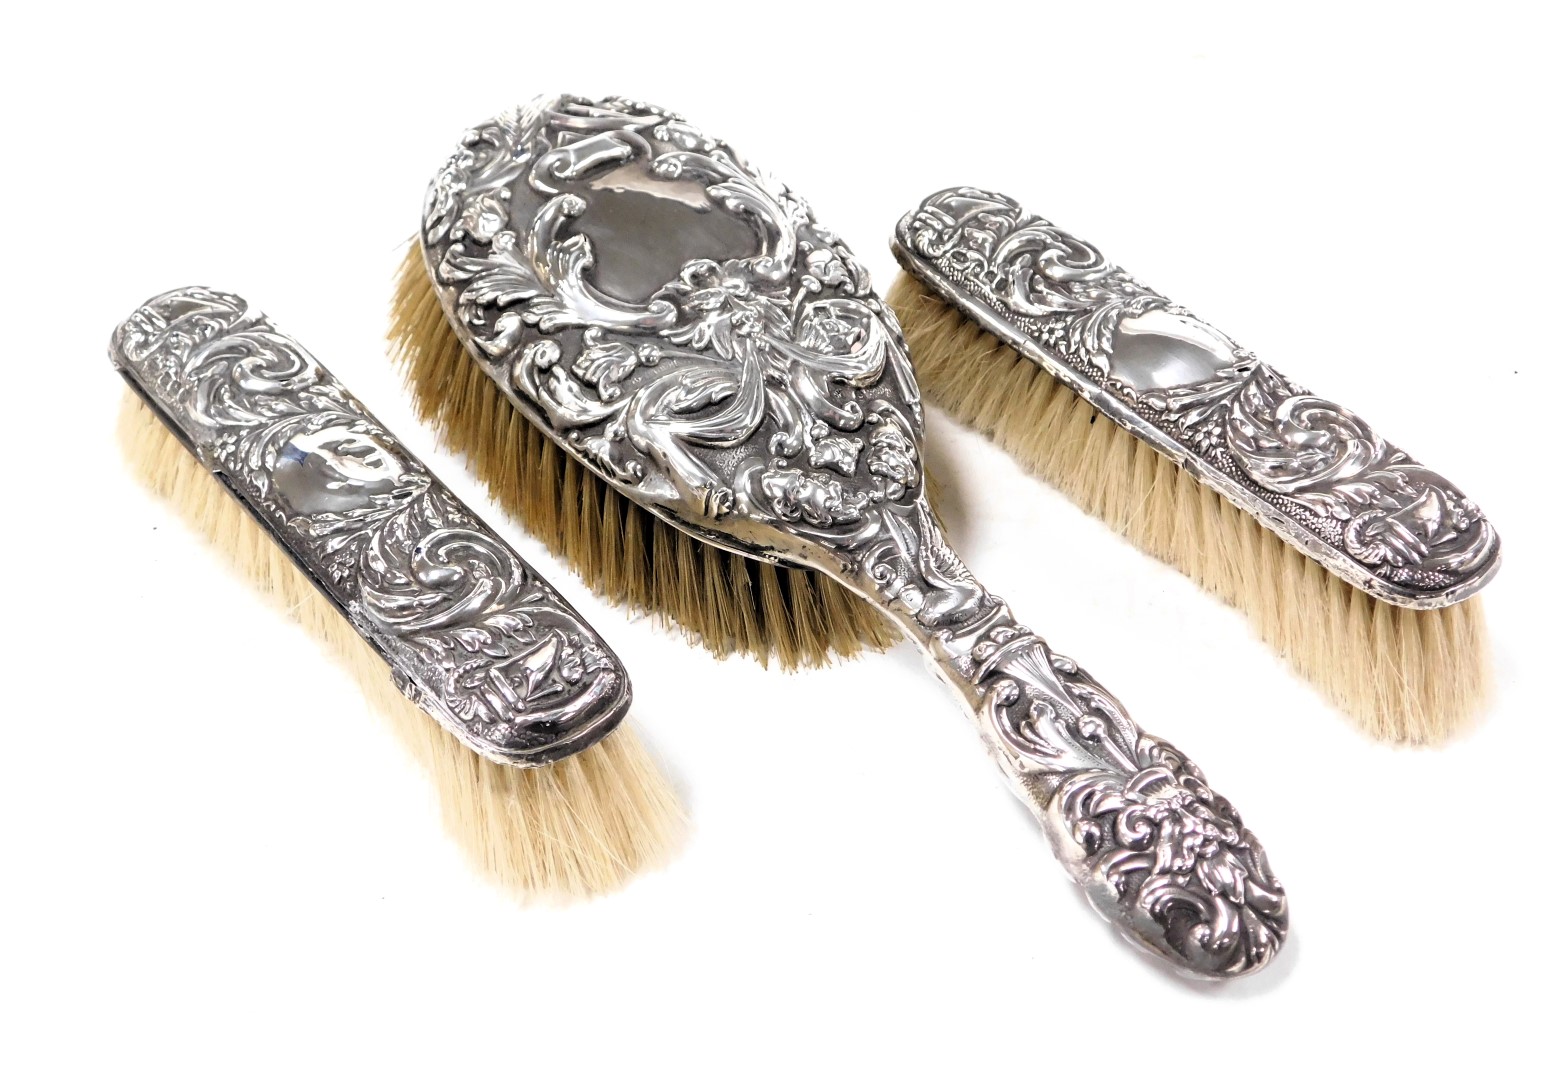 An Edward VII silver back hair brush, embossed with masks, birds, drapes and foliate scrolls, London